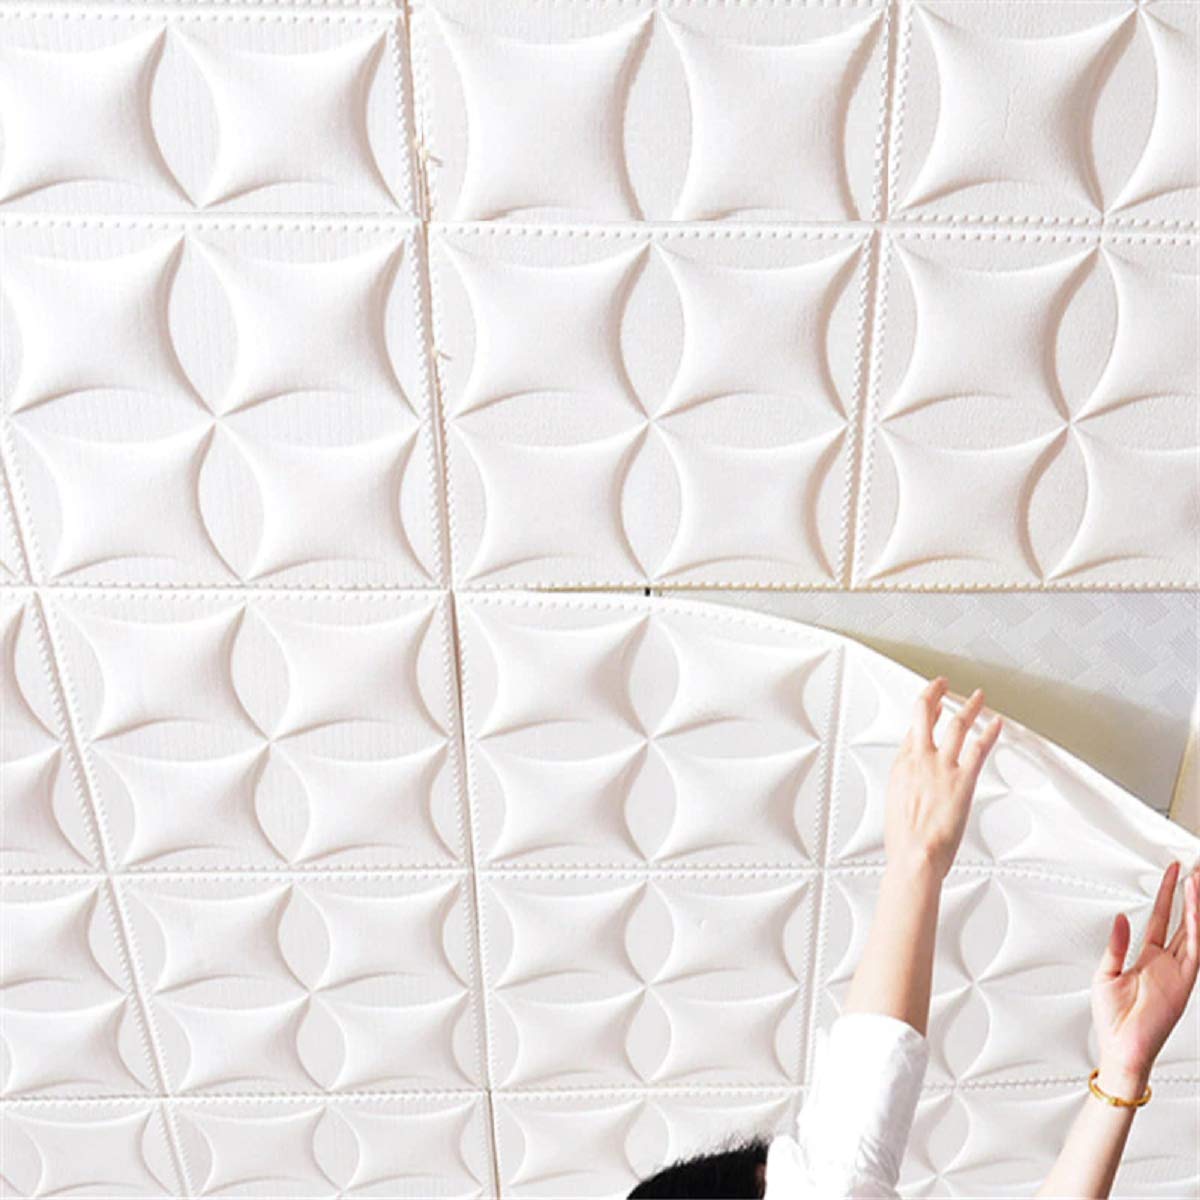 Nasmodo® 3D Ceiling Tiles Panel Vinyl Wallpaper Stickers Waterproof Foam self-Adhesive Wall Stickers for Home, Living Room, Bedroom Wall Panels Tiles Paper for Decoration((70 * 70 cm)